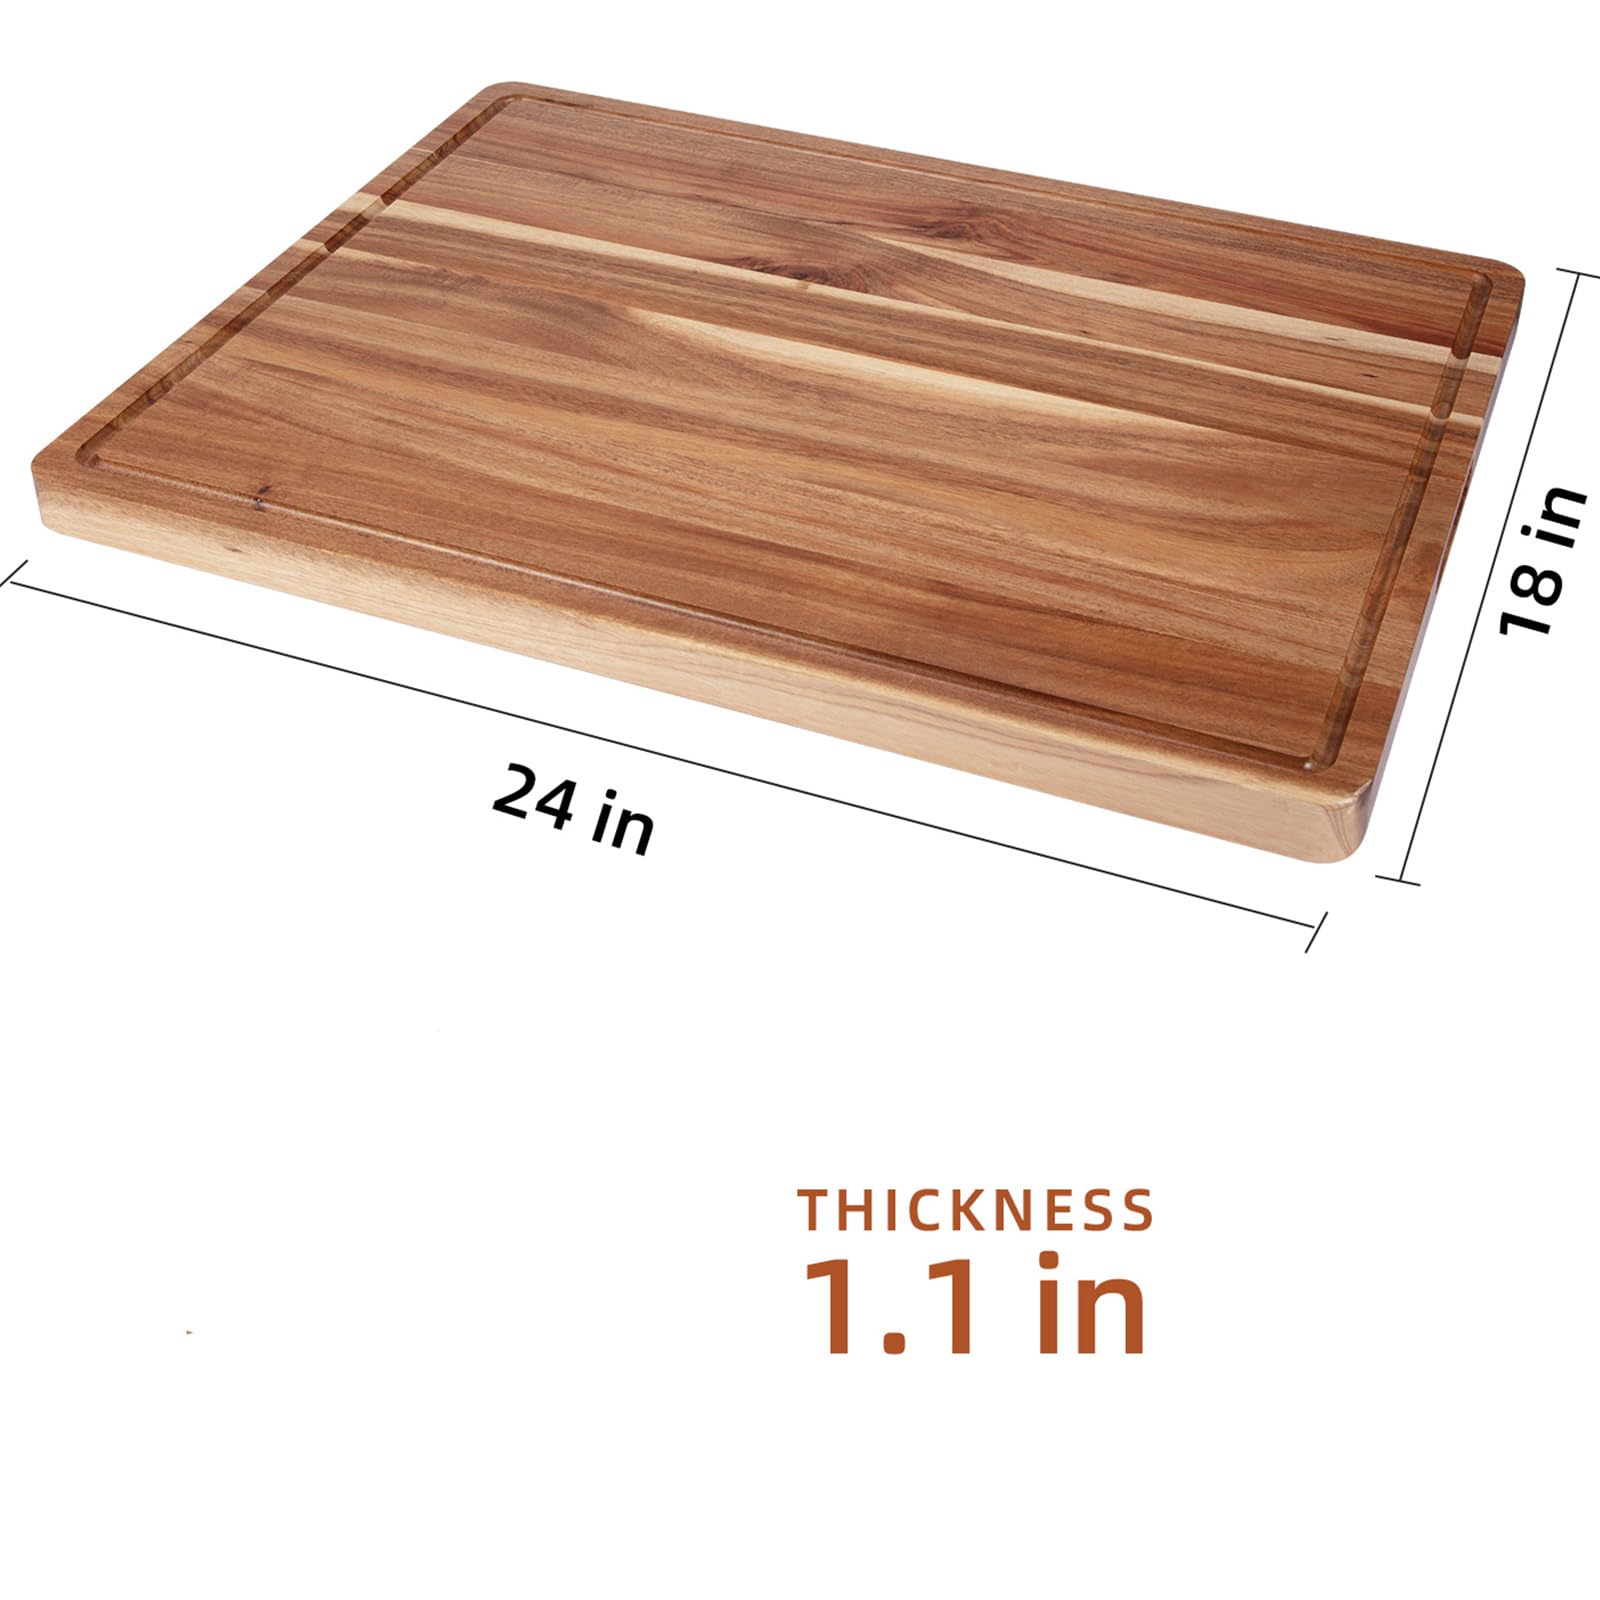 GaoMon 24 x 18 In Acacia Cutting Boardfor Kitchen, XXL Extra Large Charcuterie Cheese Platter Serving Tray, Food Prep and Serving Boards, Chopping Boards for Meal Vegetables and Cheese